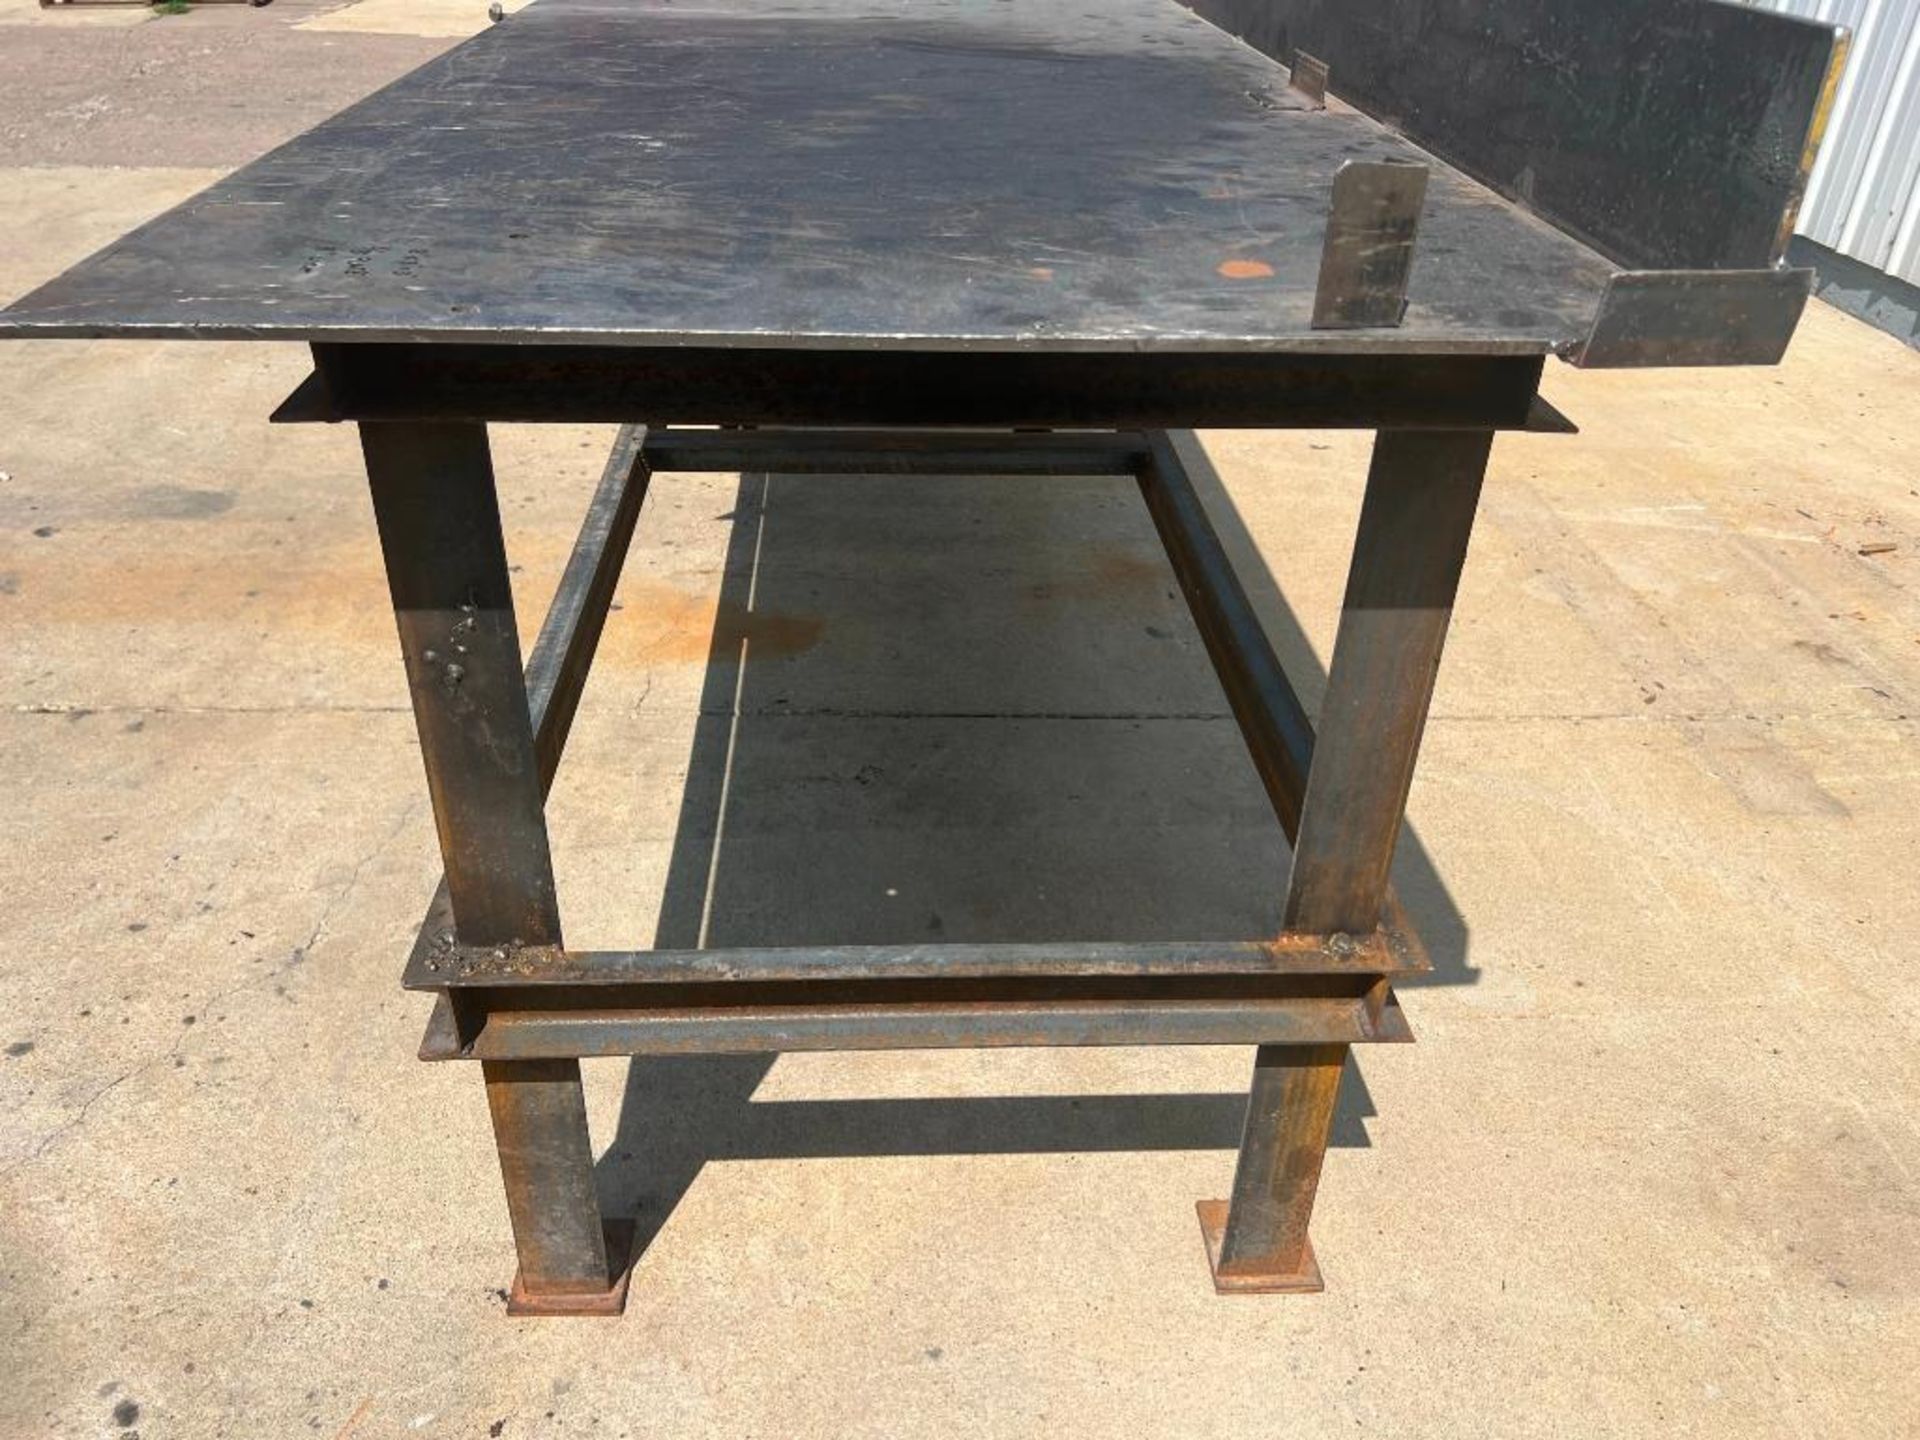 steel bench 8' x 3' x 3' with Wilton 8" vise, located in Mt. Pleasant, IA. - Image 4 of 5